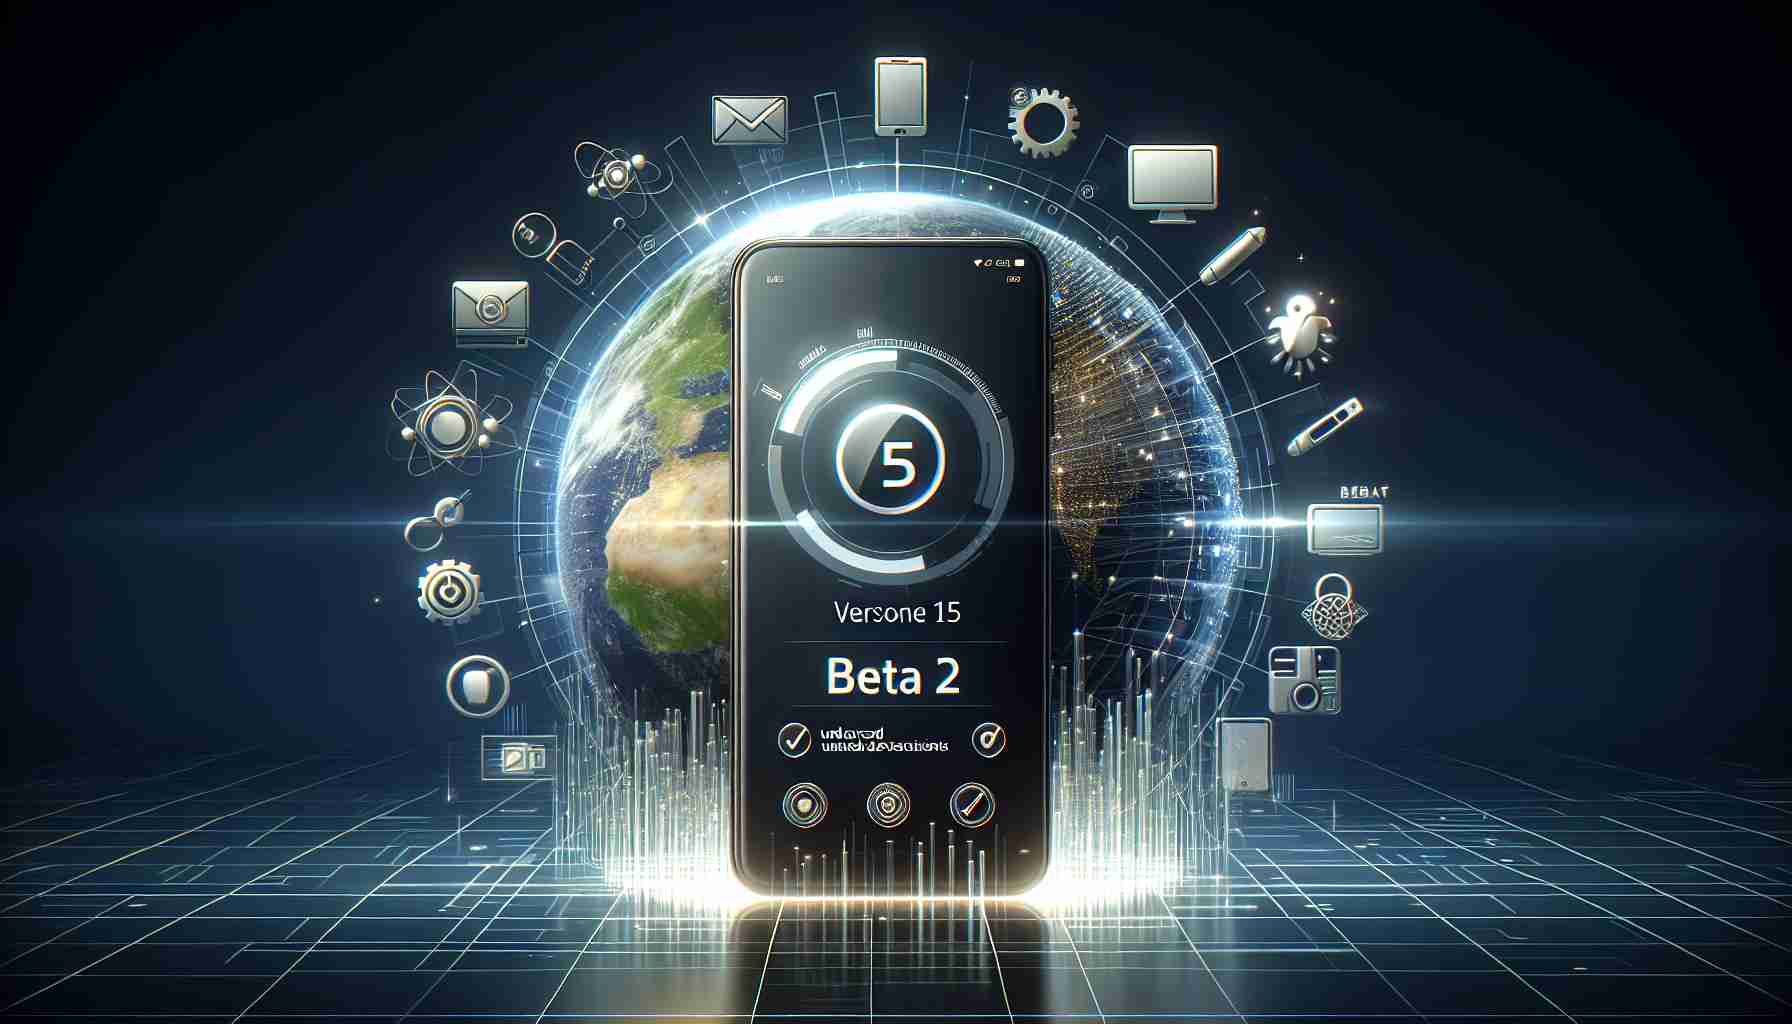 Google Launches Android 15 Beta 2 with Advanced Security and More Device Compatibility